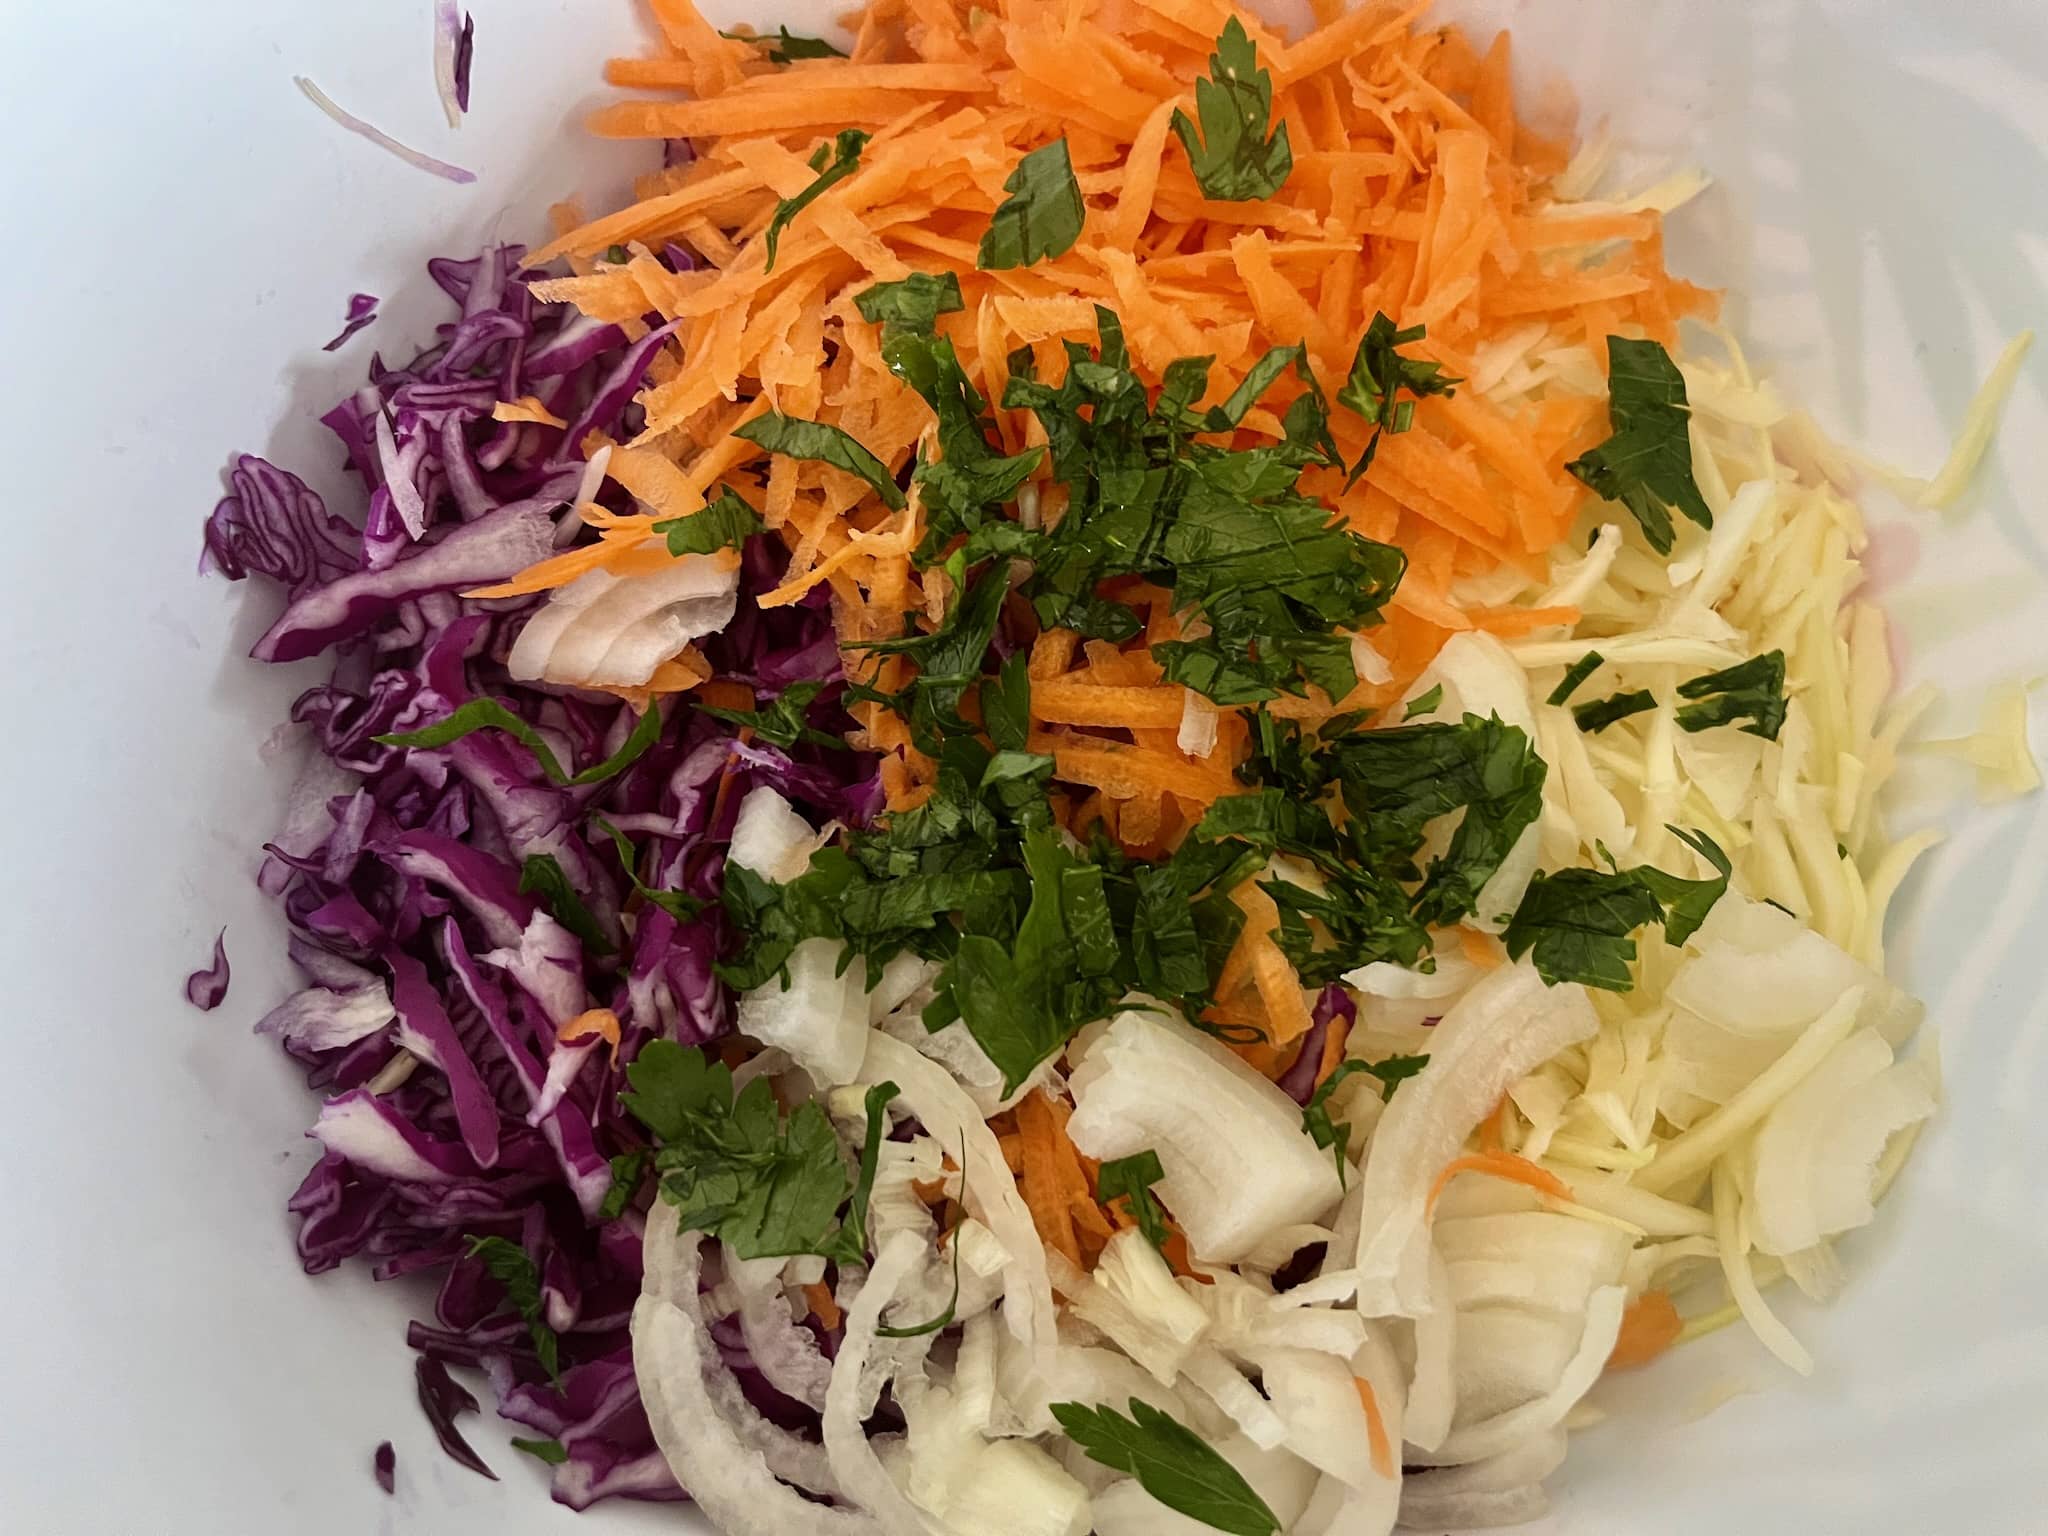 Shredded red and white cabbage, grated carrot, sliced onion and parsley in a bowl